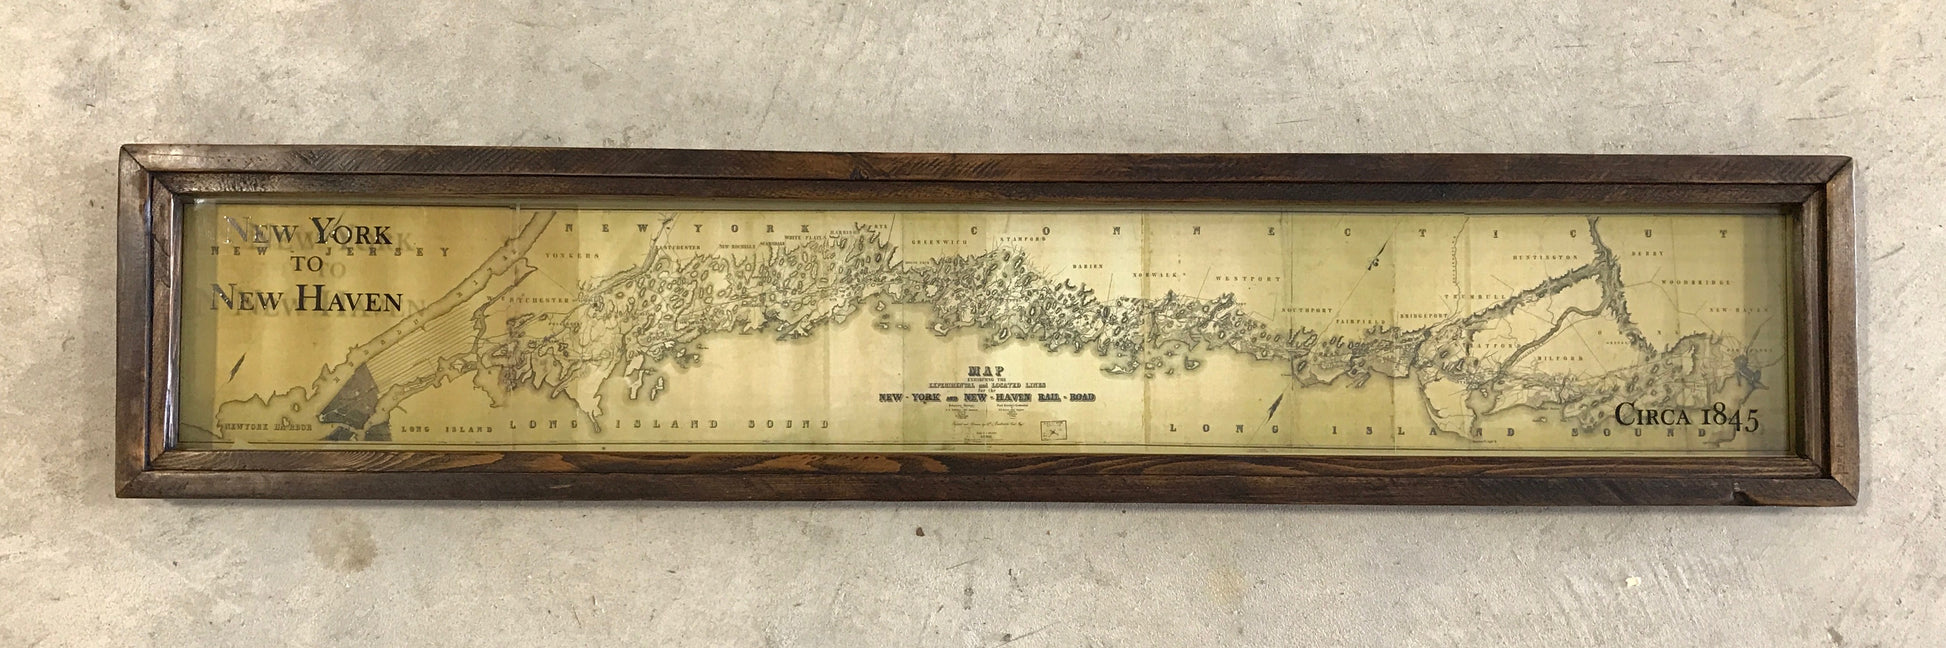 Vintage New York To New Haven Railroad Map Circa 1845 Framed Shadowbox 45-in W - Mellow Monkey